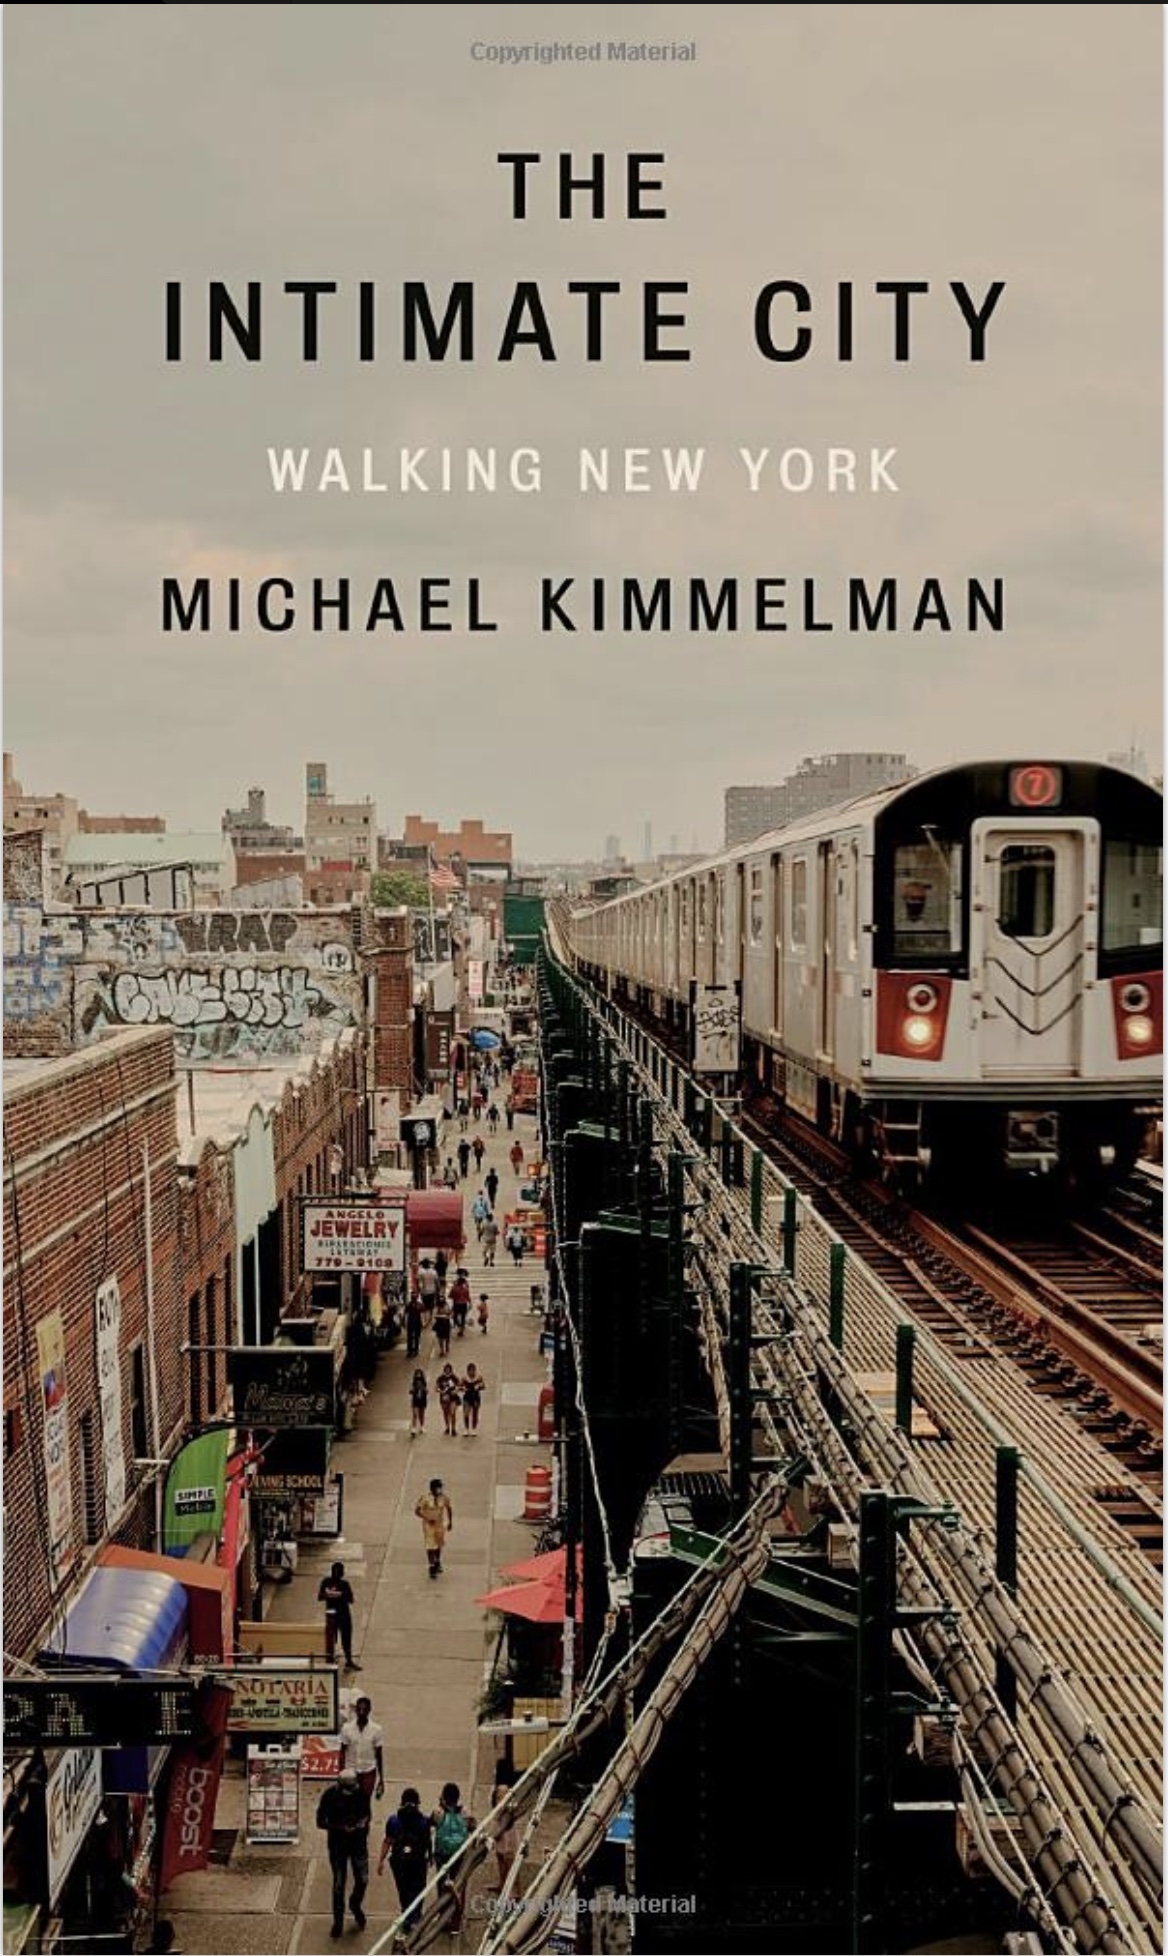 the intimate city walking new york by michael kimmelman